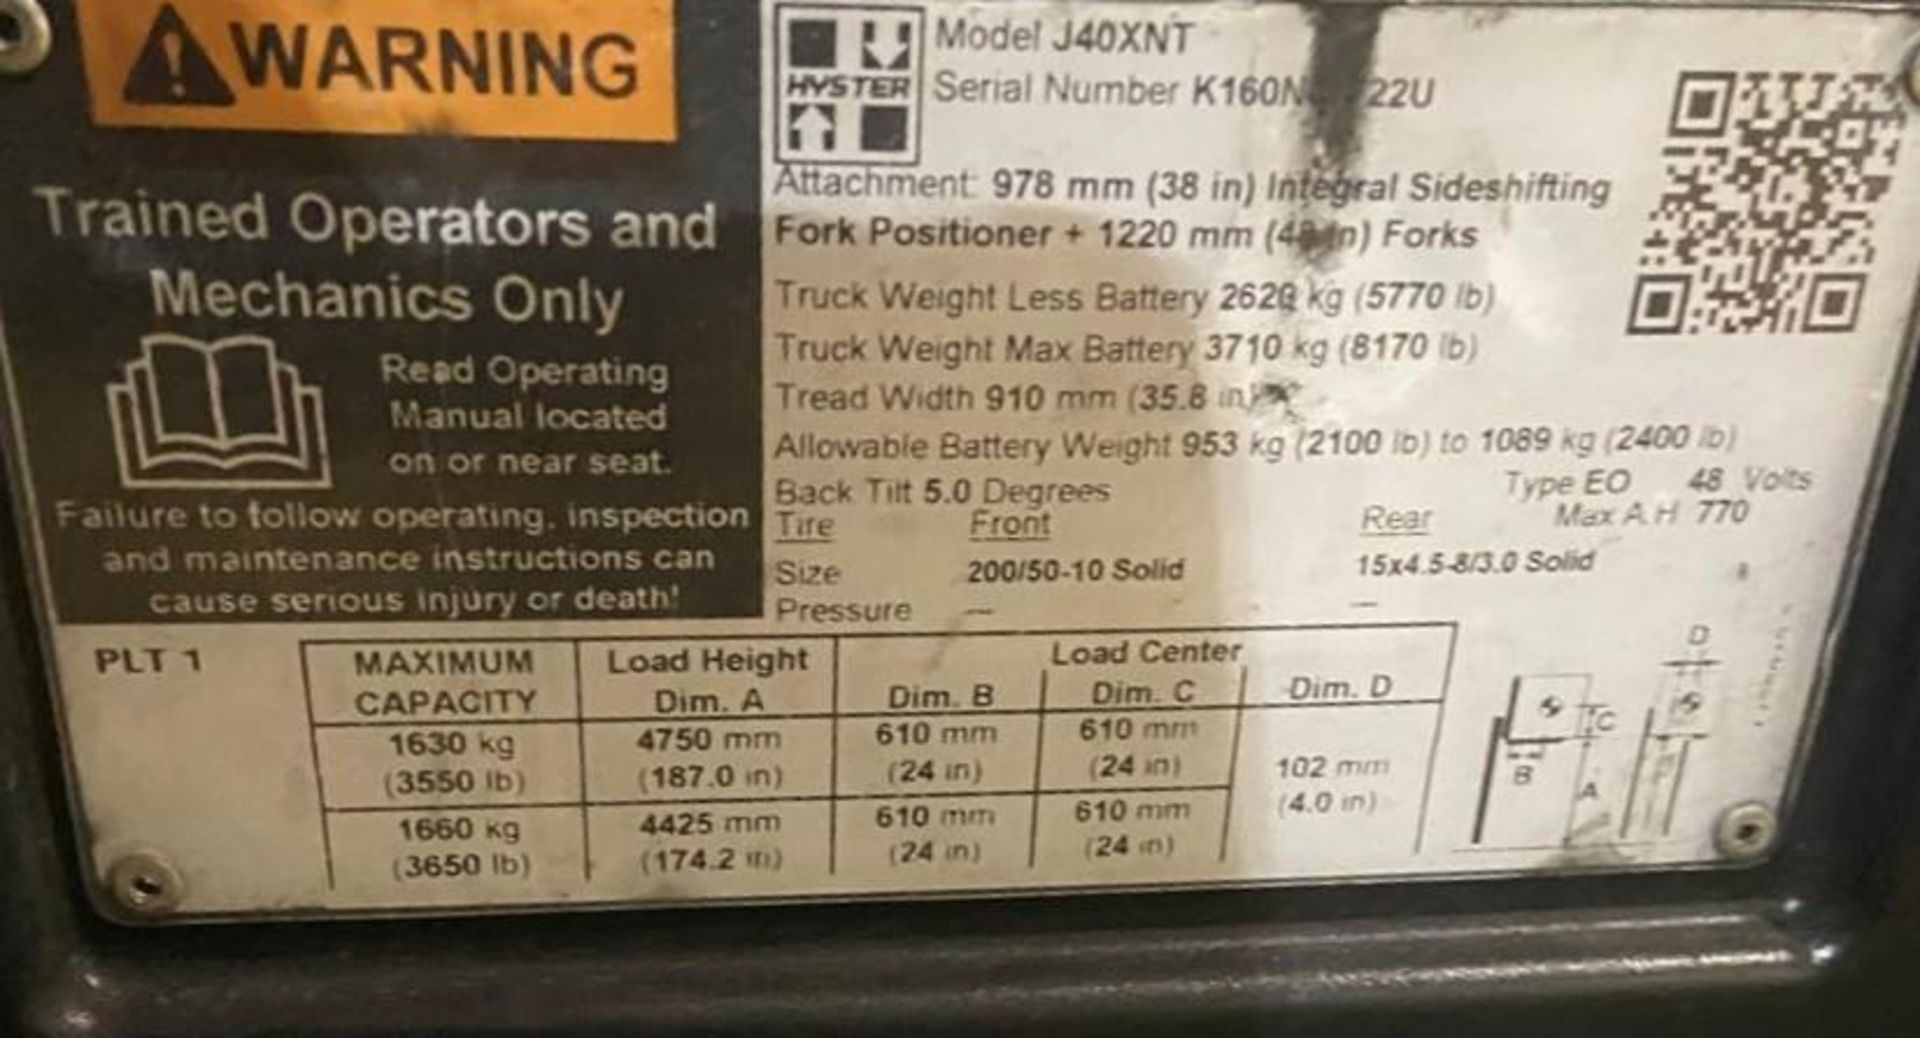 *NEW 2019* 4,000 Lb. Hyster #J40XNT Electric Lift Truck - Image 2 of 3